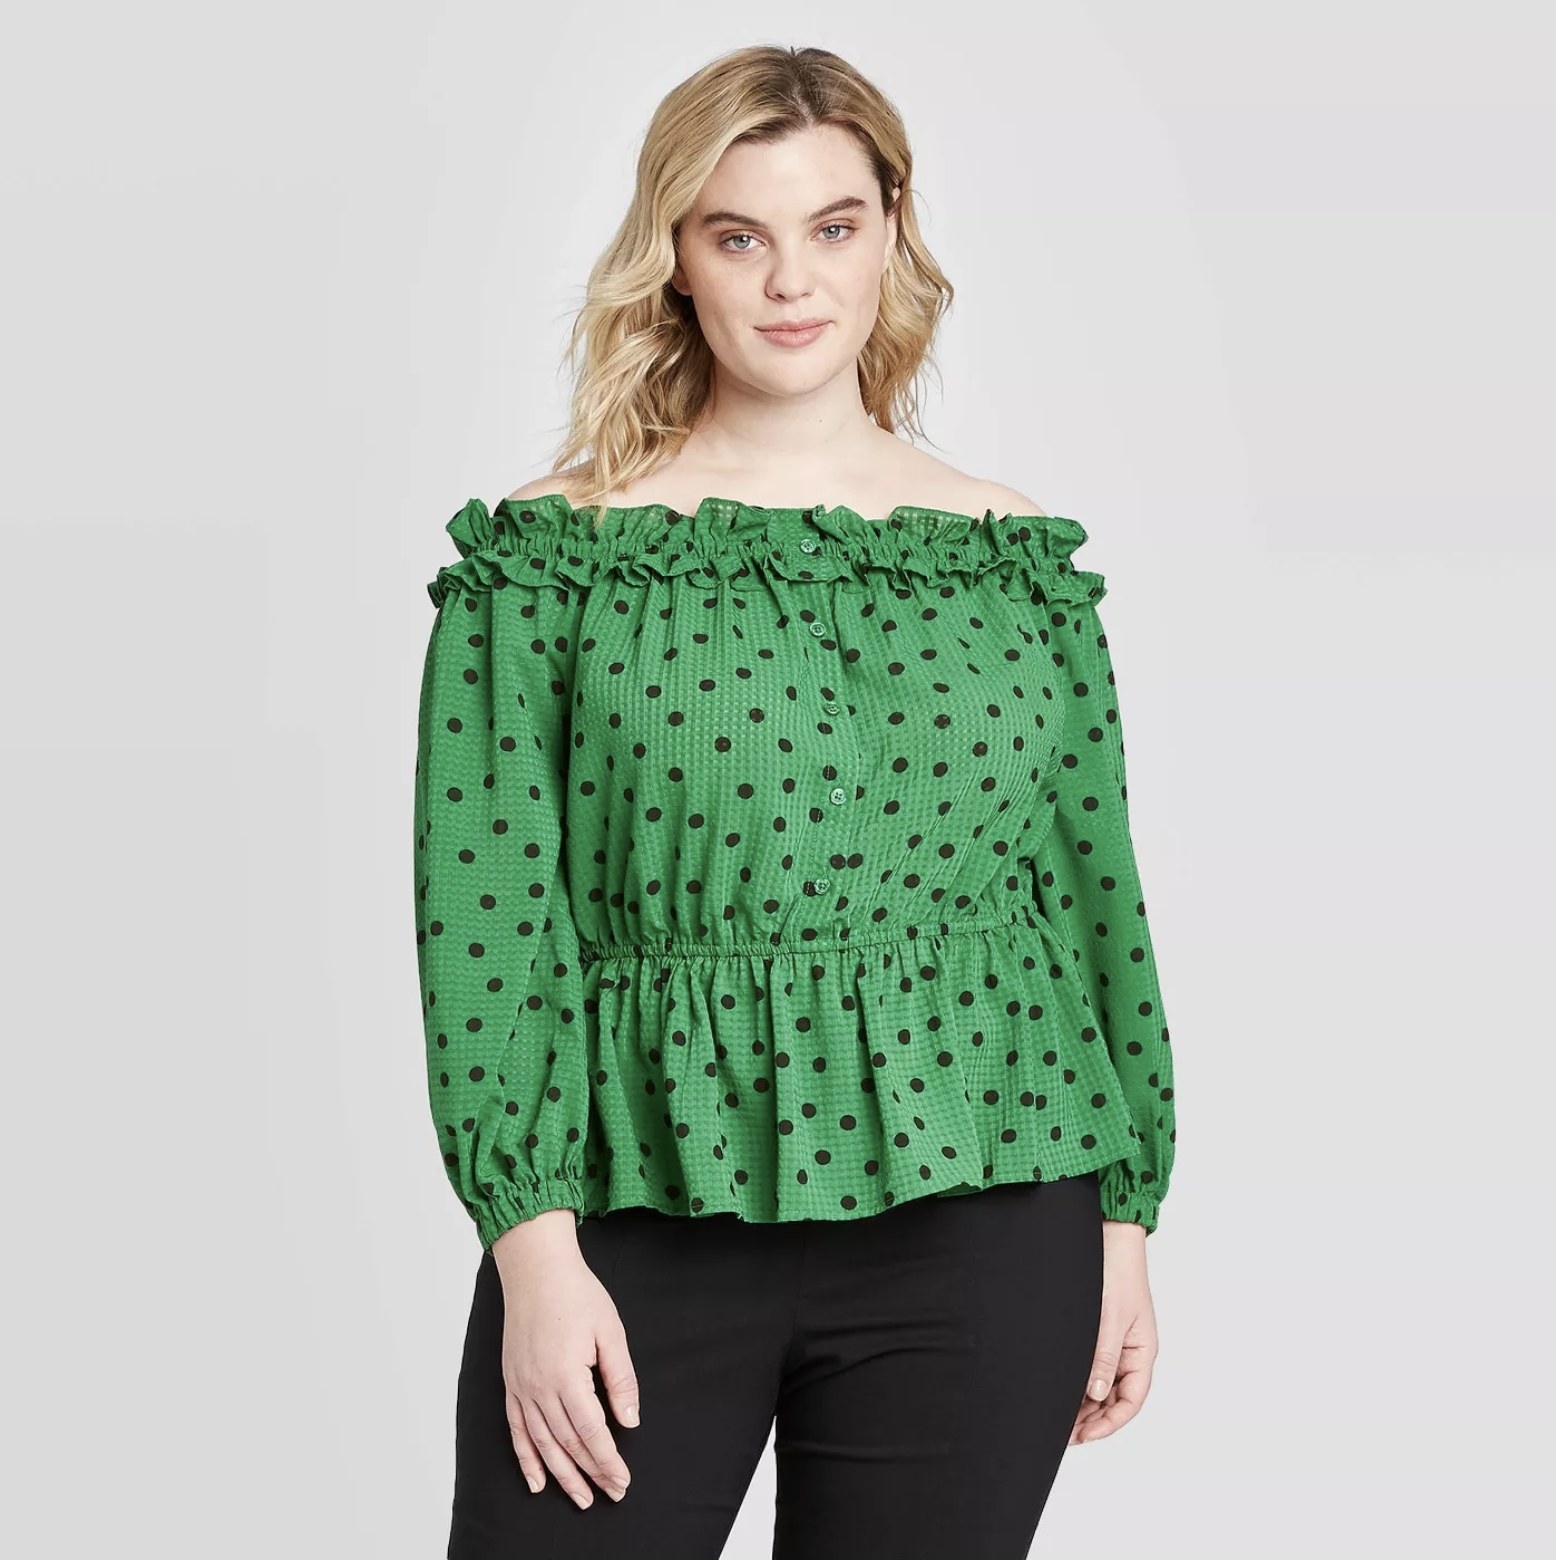 Model is wearing a green smocked off-the-shoulder blouse with small black polka dots